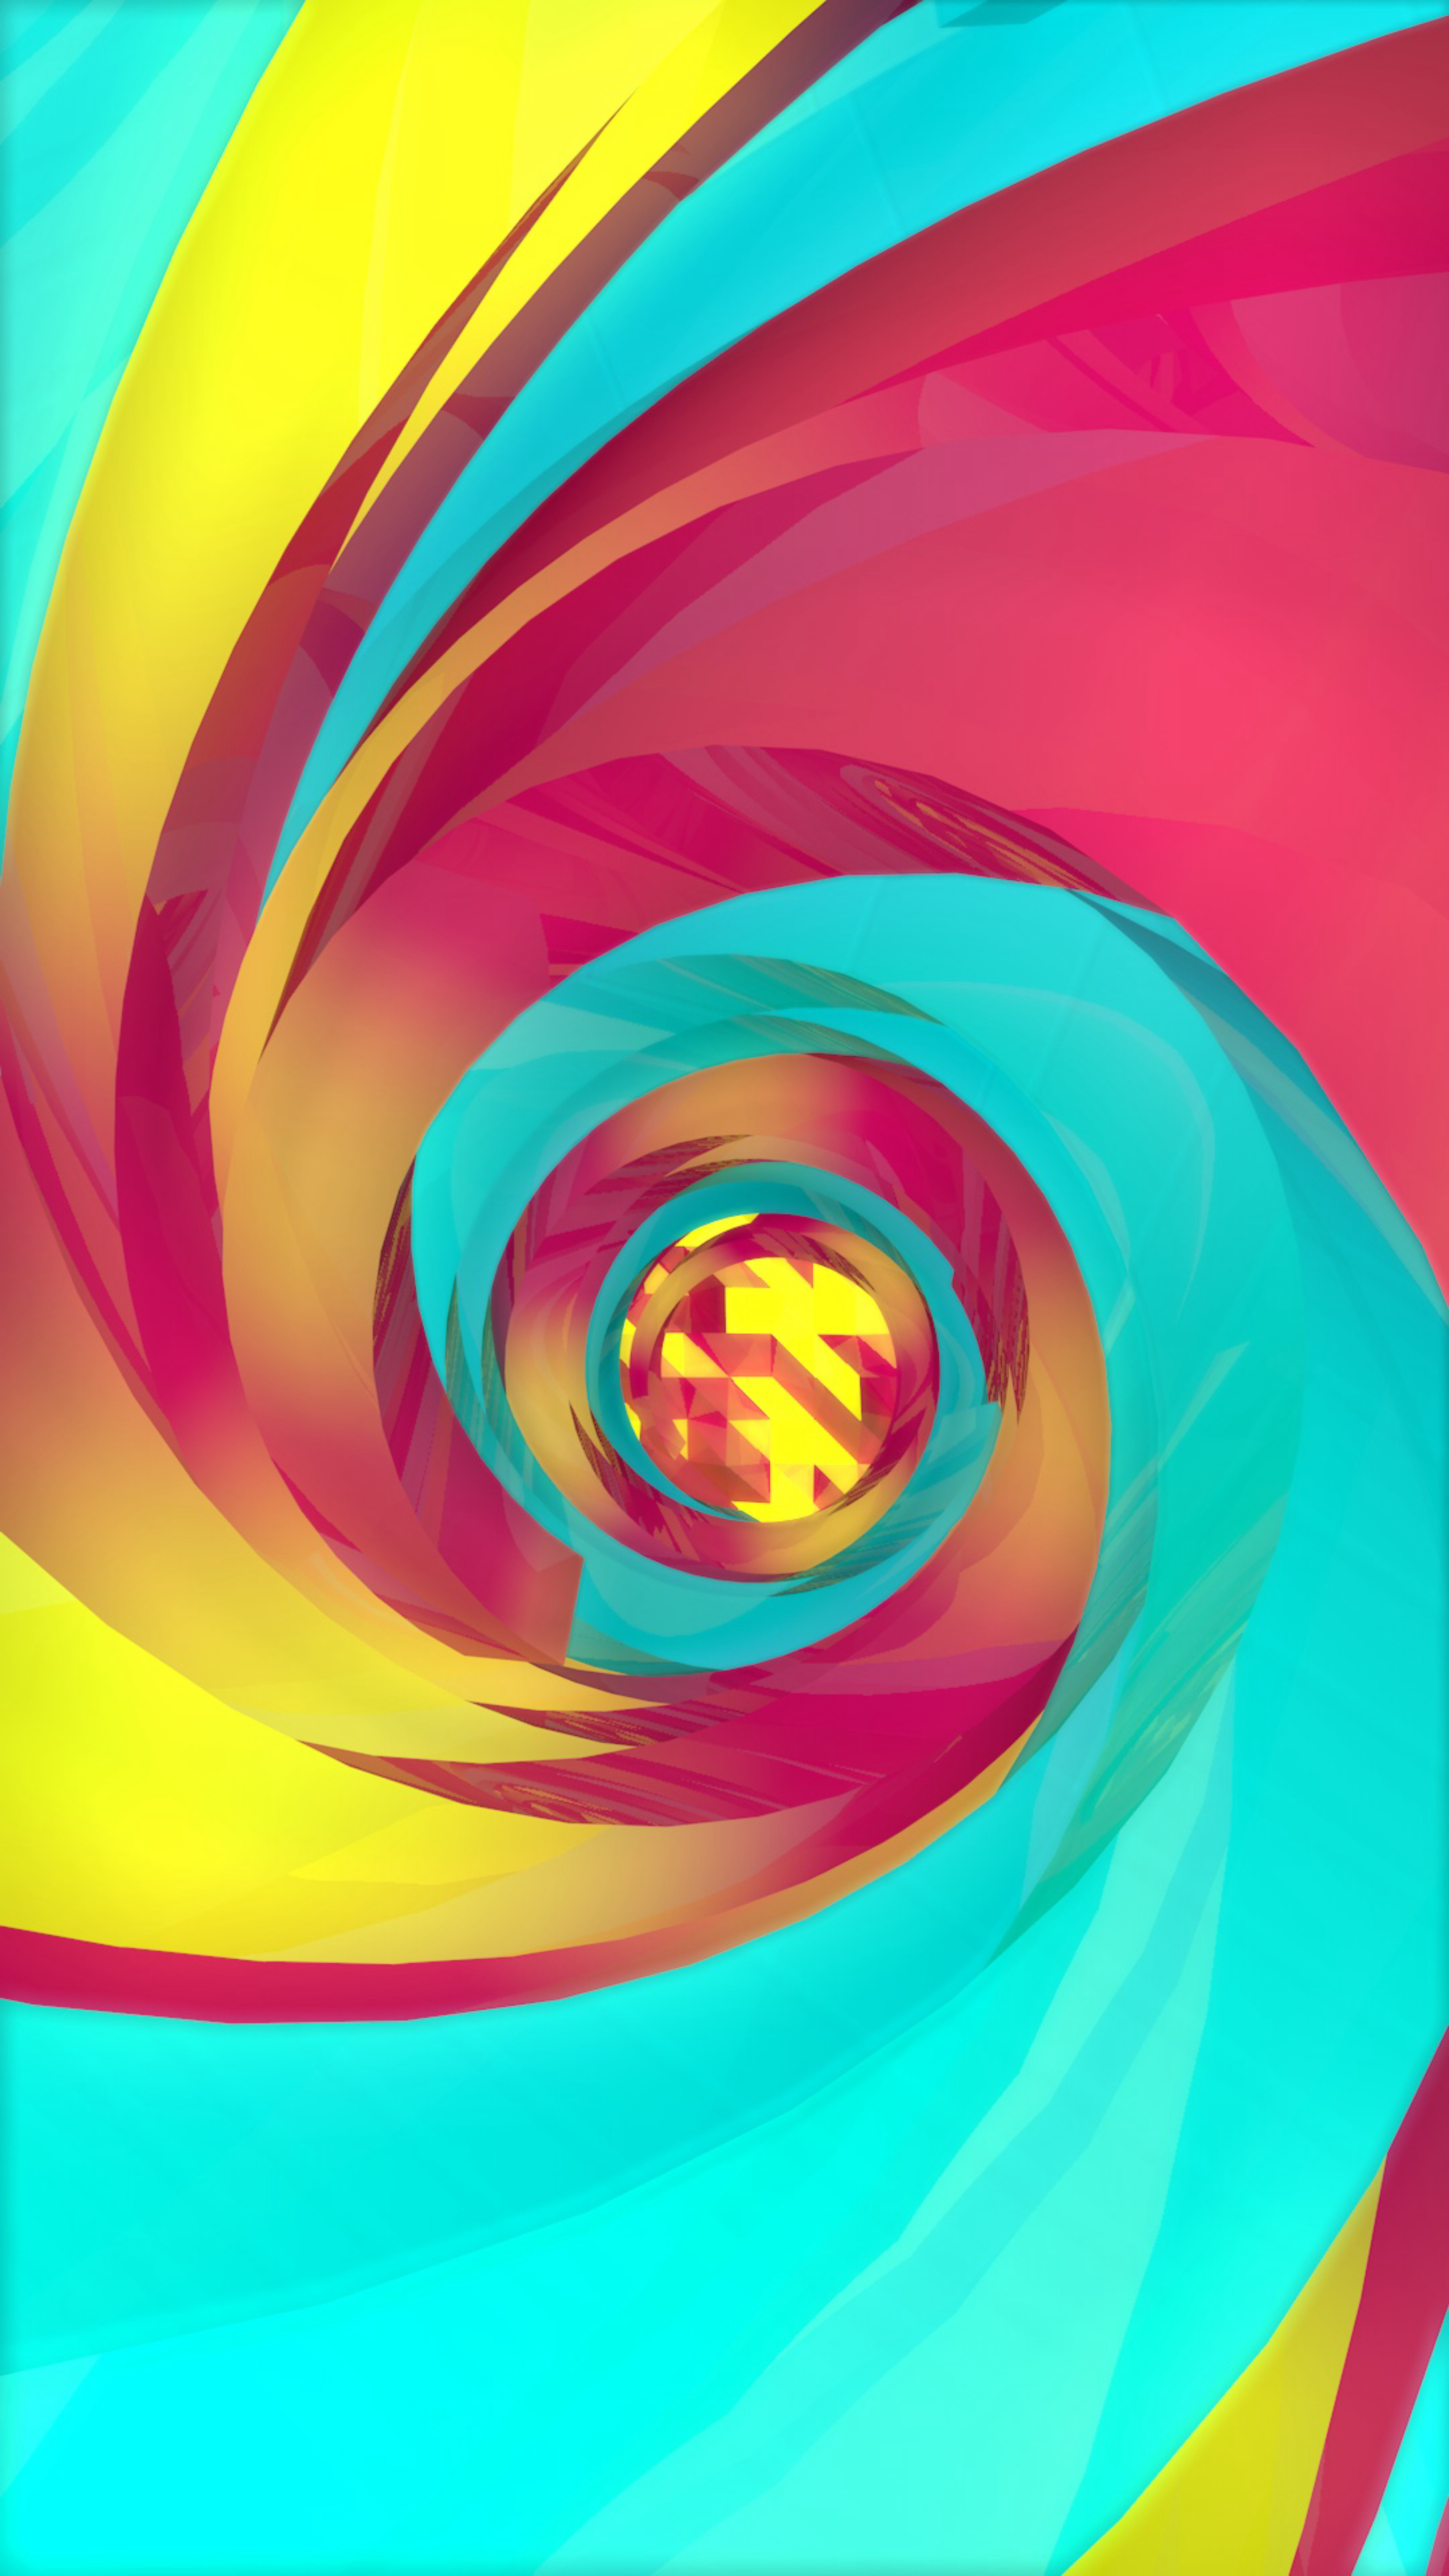 textures, swirling, abstract, multicolored, motley, texture, funnel, spiral, involute cell phone wallpapers